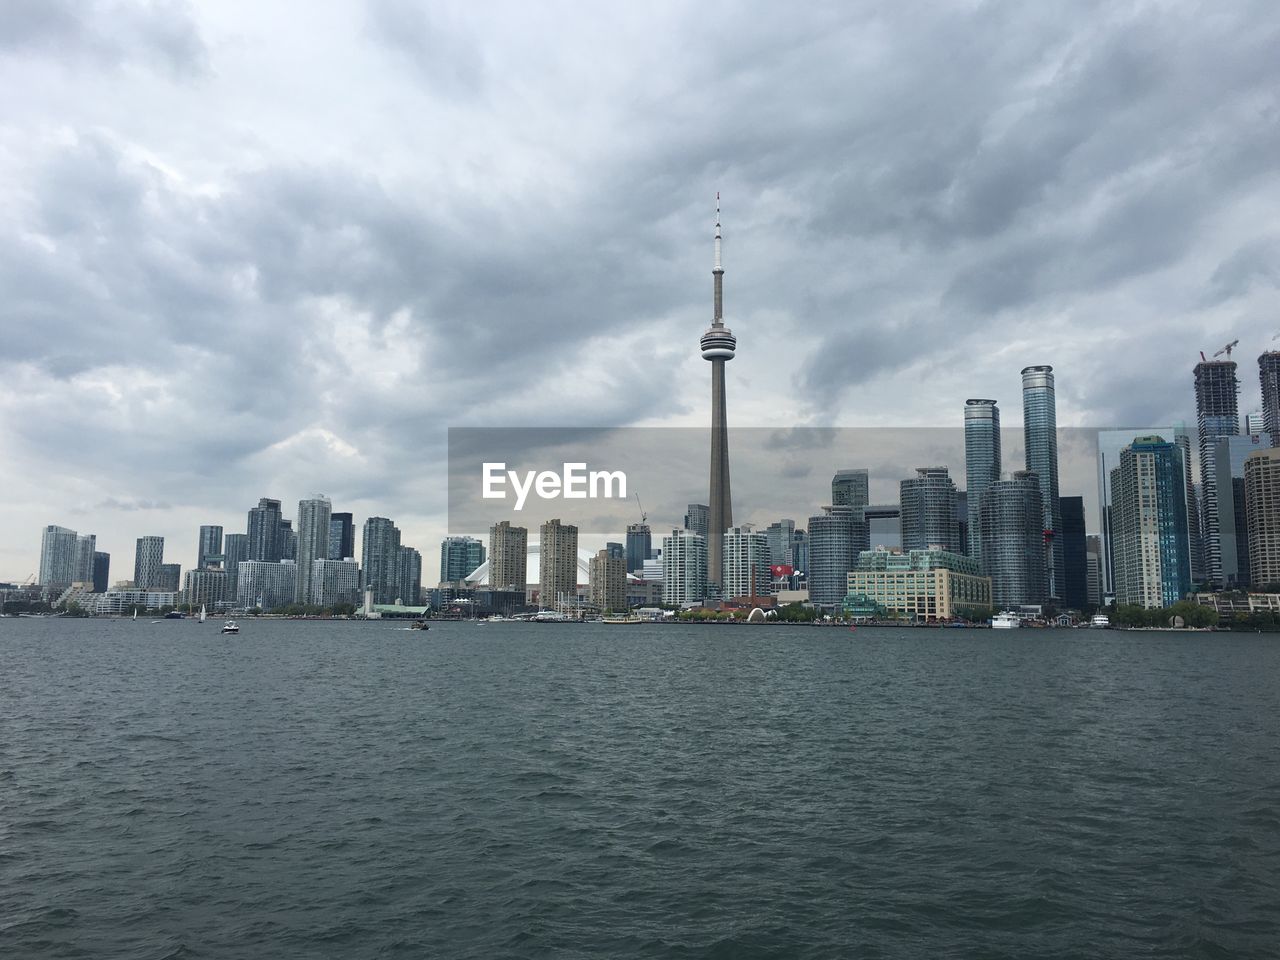 Cn tower by river against cloudy sky in city